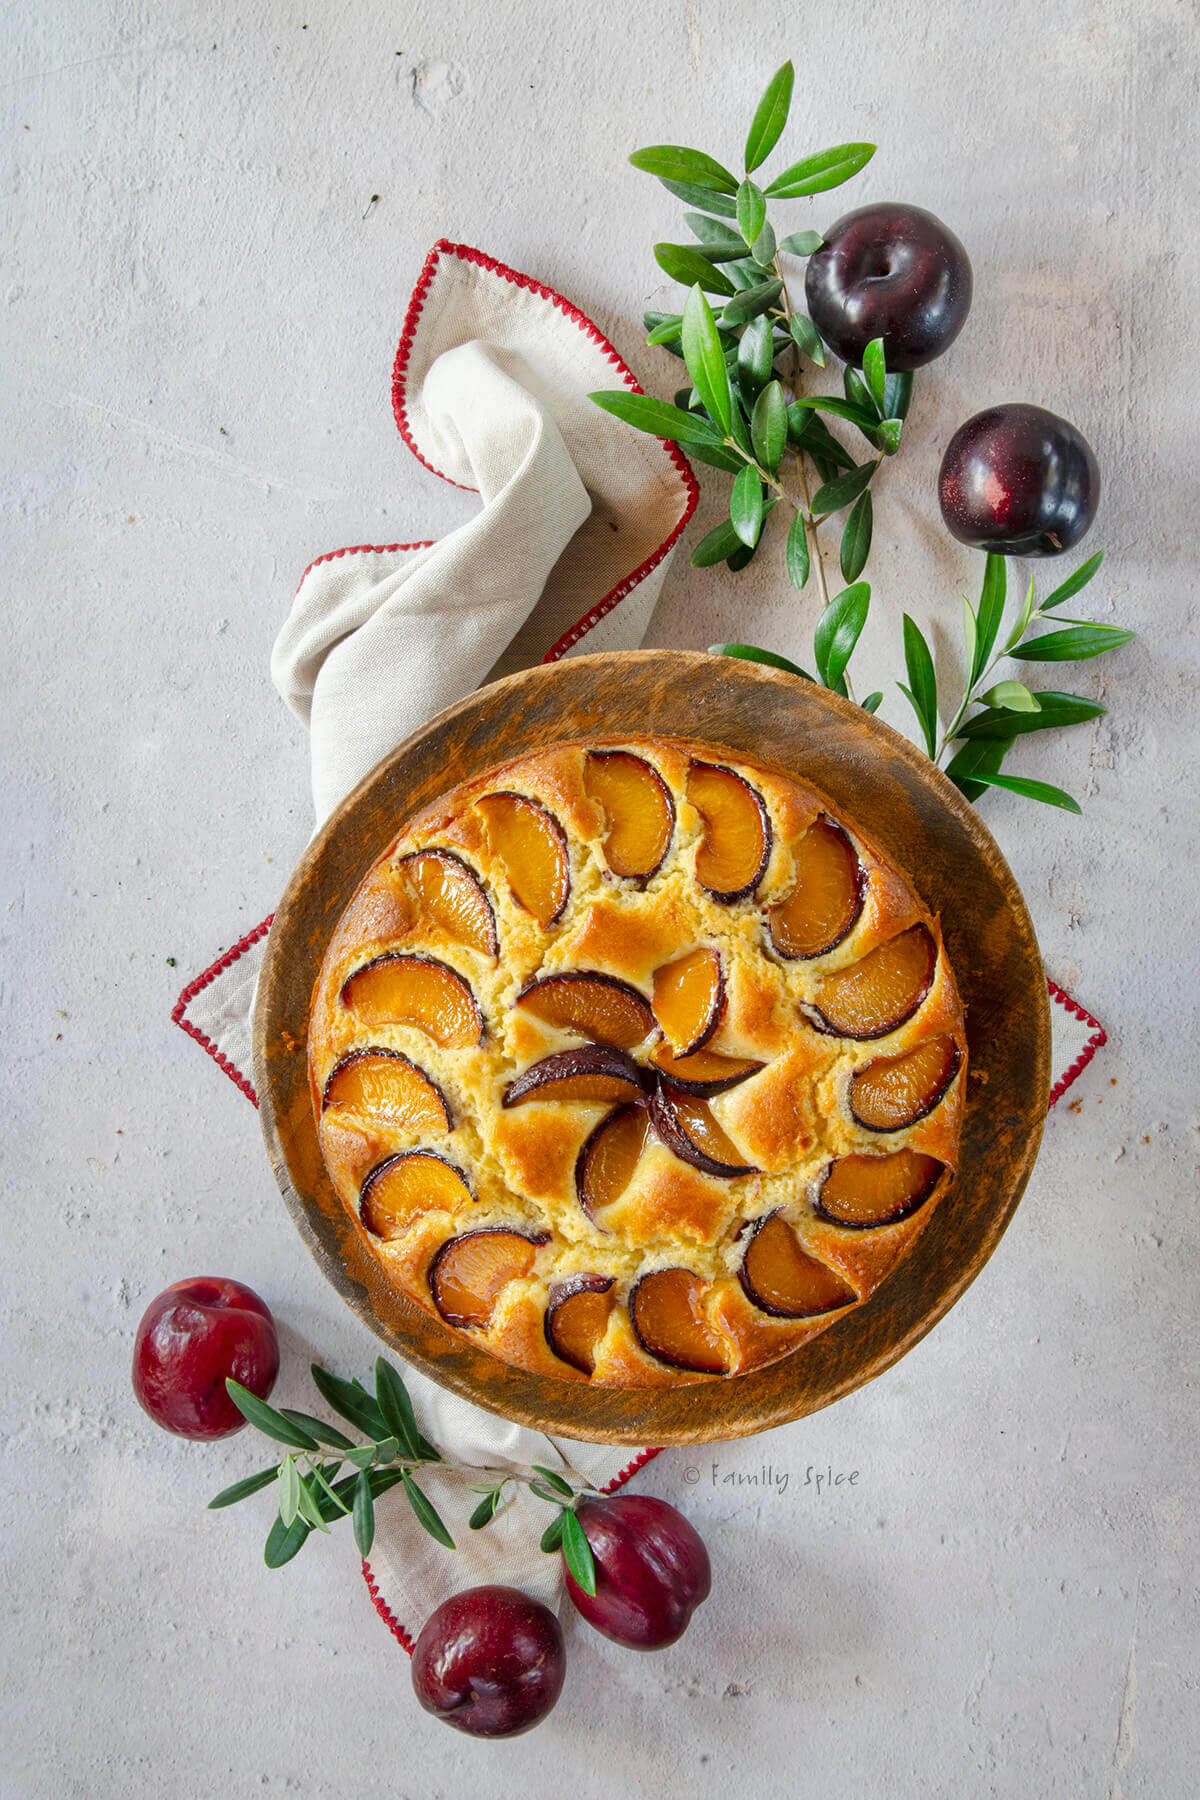 Top view of a plum cake on wood cake stand with olive branches and plums next to it